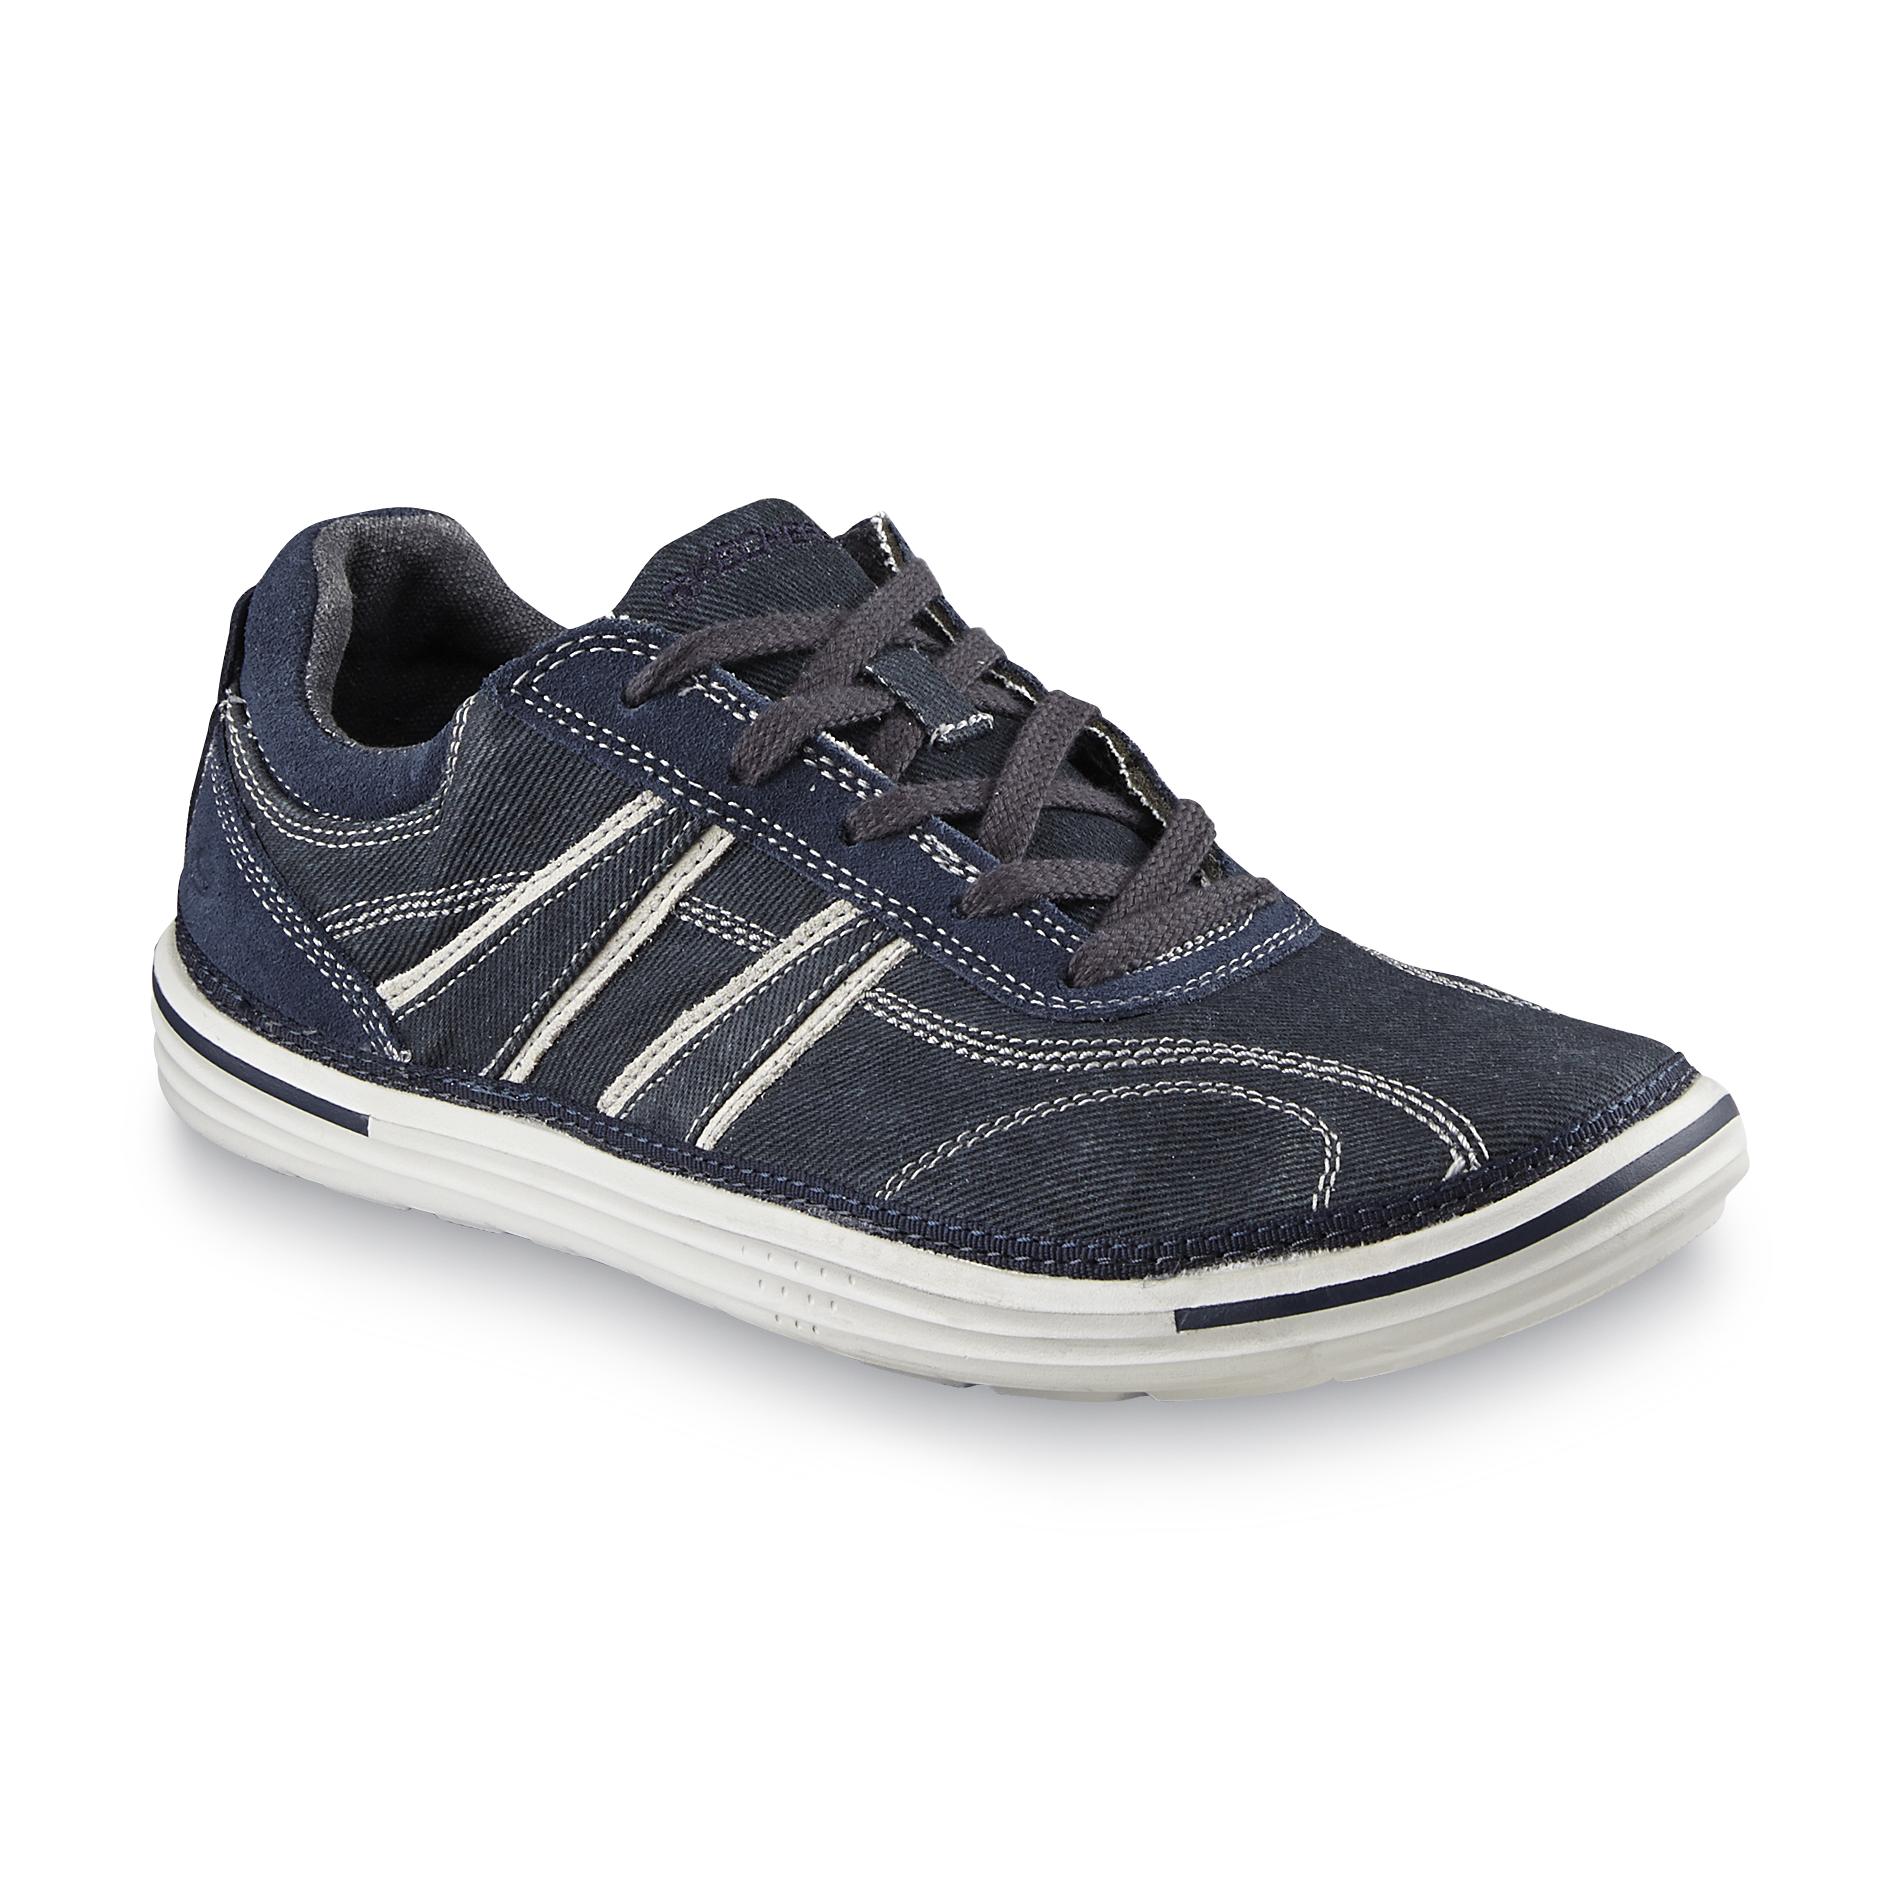 Skechers Men's Morse Relaxed Fit Canvas Oxford - Navy